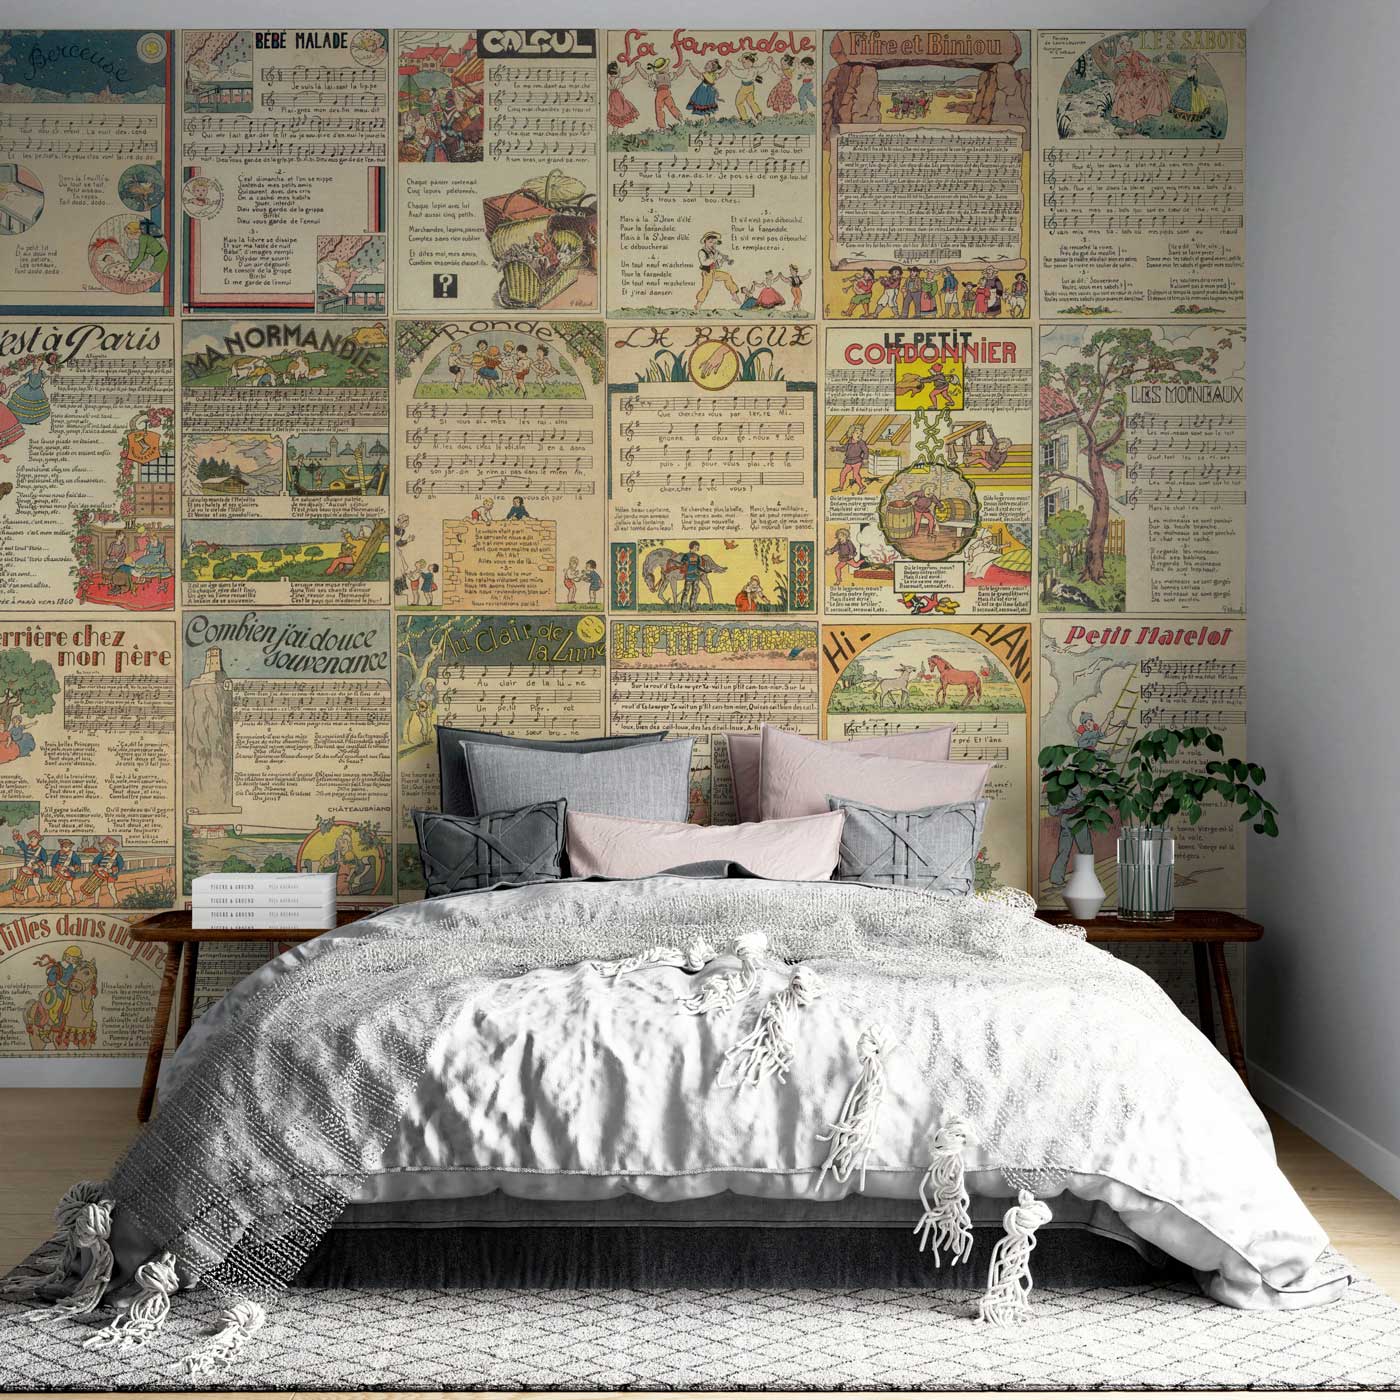 Wallpaper mural with a musical notation pattern for use as bedroom decor.